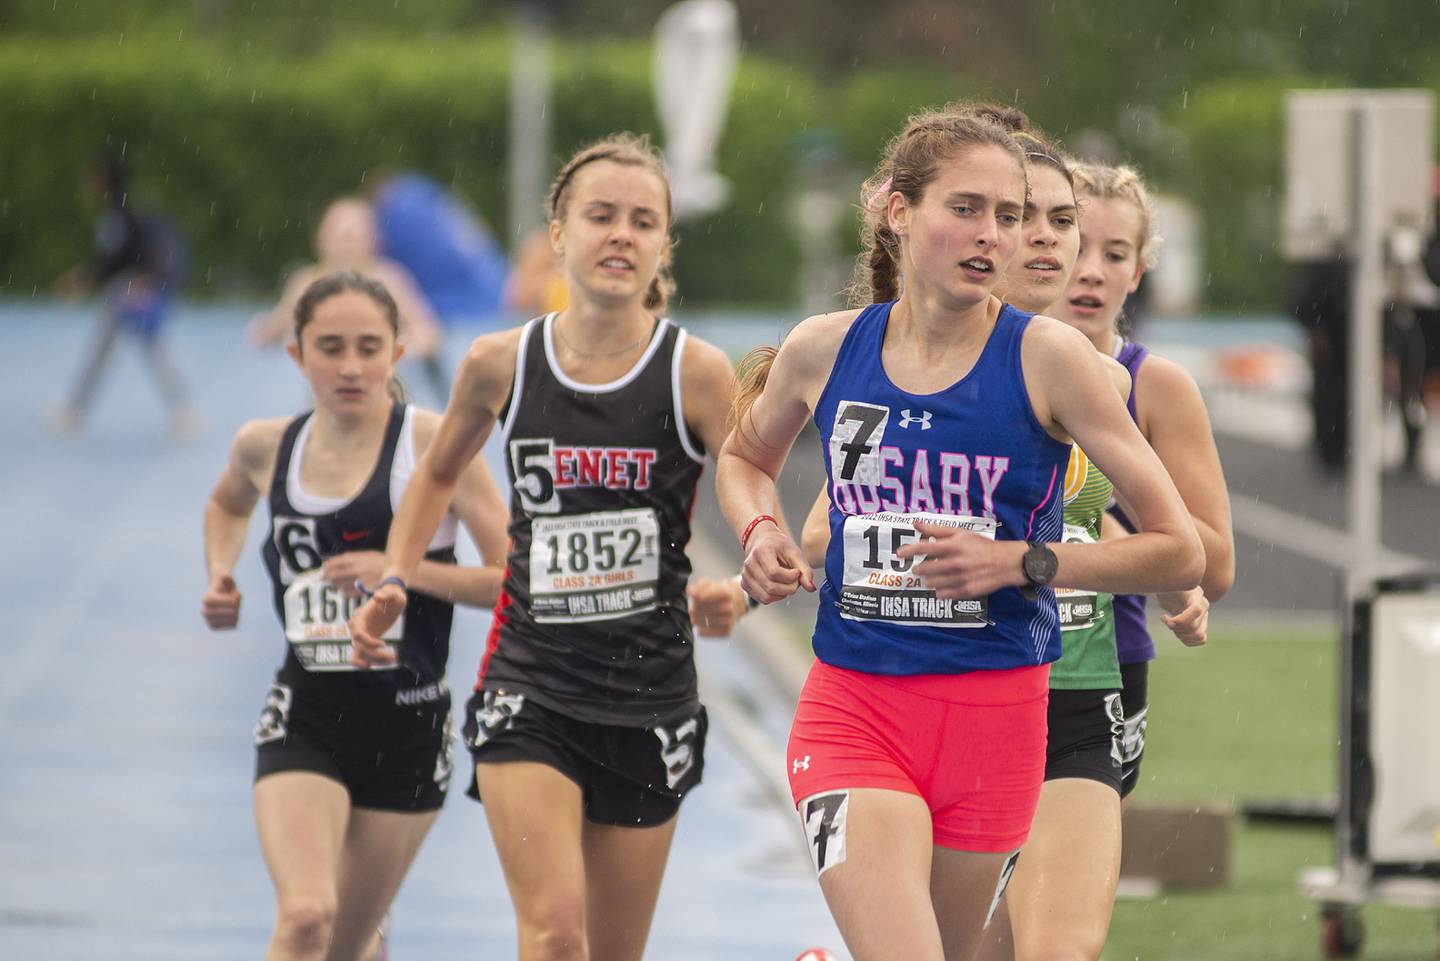 Rosary's Lianna Surtz leads a pack in the 2A 1600 finals during the IHSA girls state championships, Saturday, May 21, 2022 in Charleston.